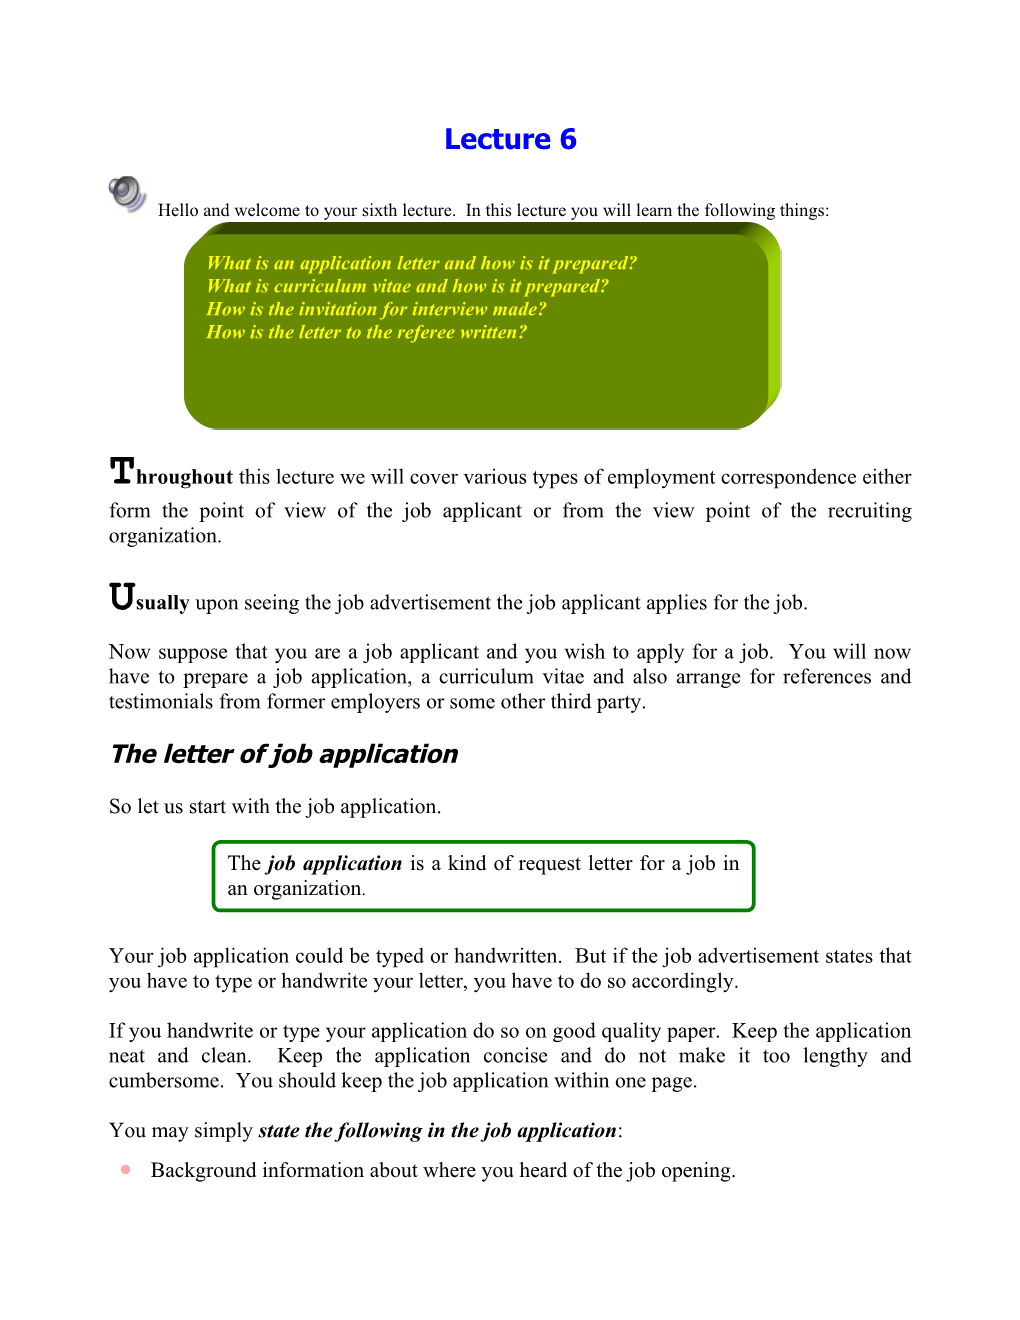 The Letter of Job Application